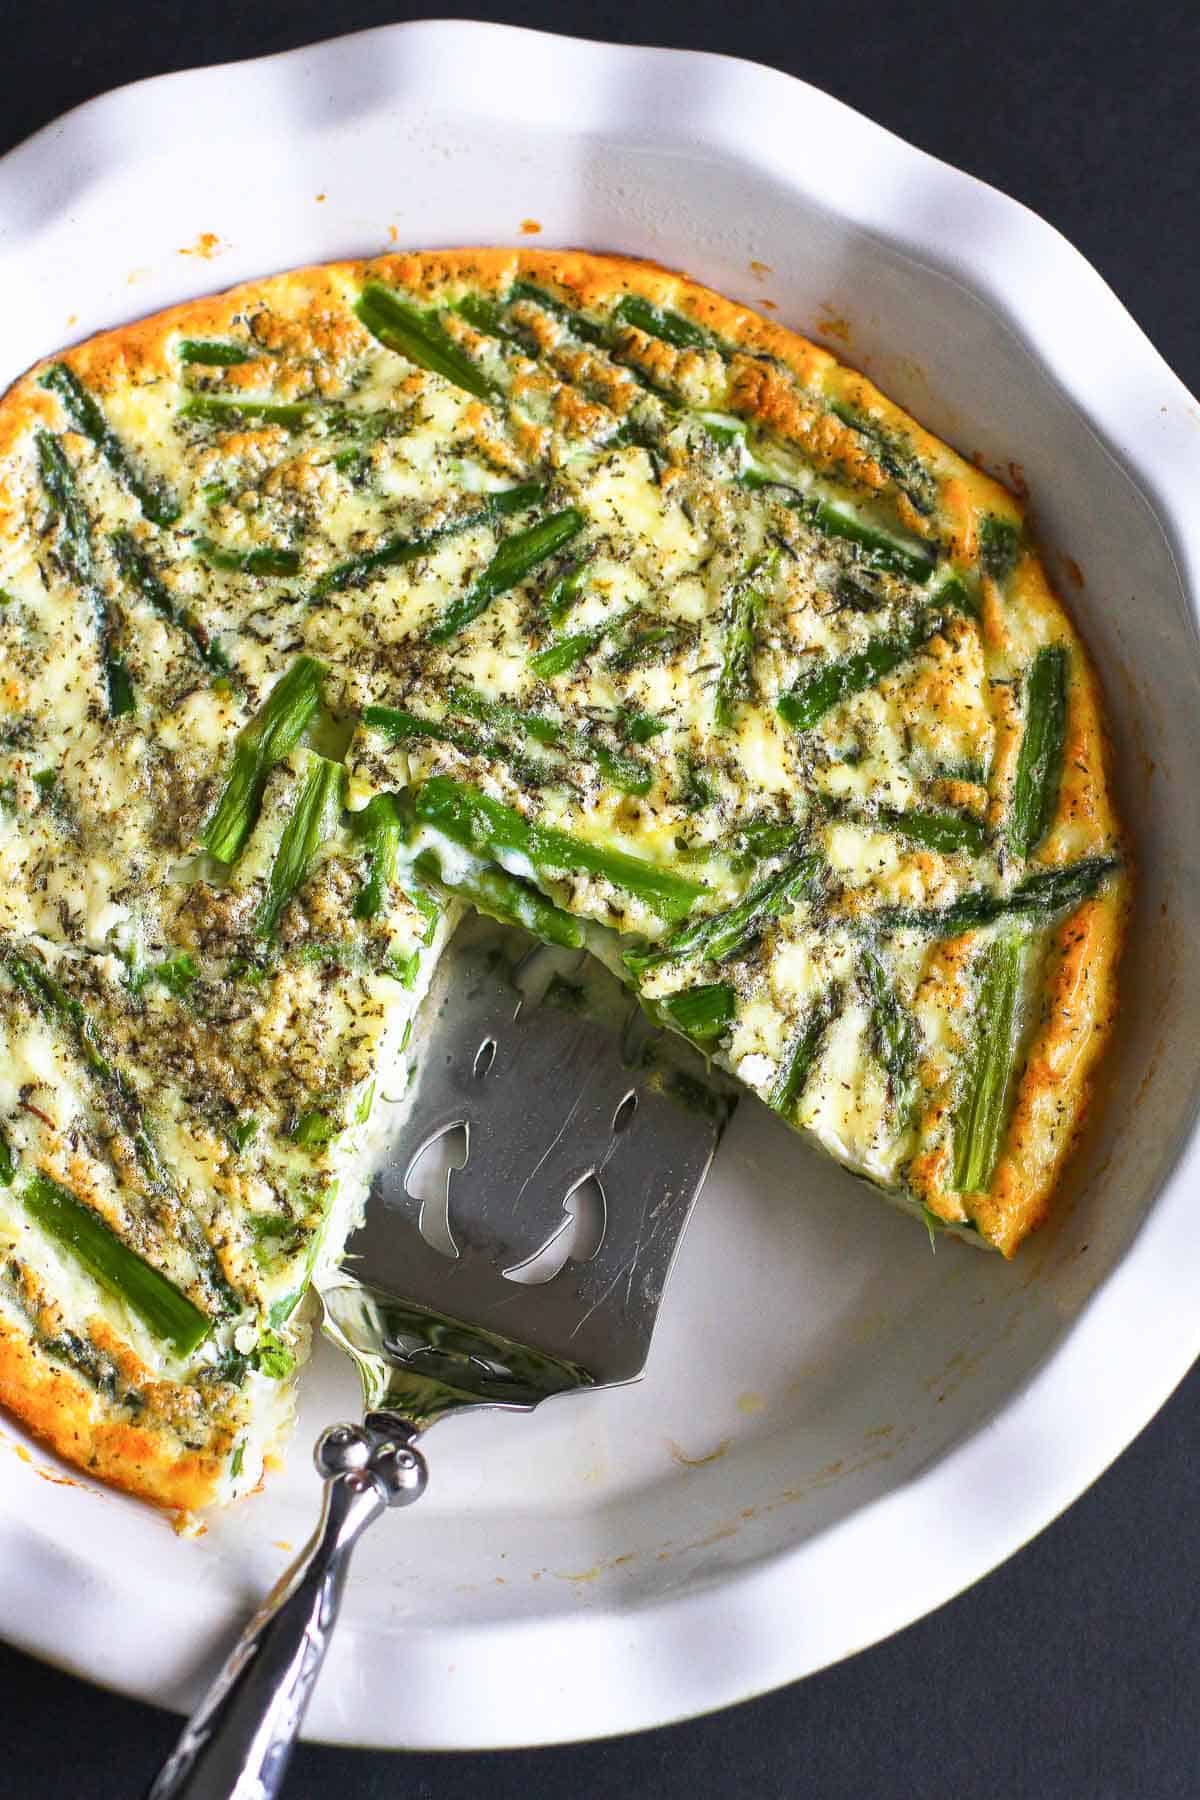 Celebrate the arrival of spring with this easy crustless asparagus quiche recipe. You’ll never guess what the secret ingredient is to lighten it up! | Recipes | Easy | Brunch | Easter | Healthy | Low Carb | Vegetarian | Without Meat